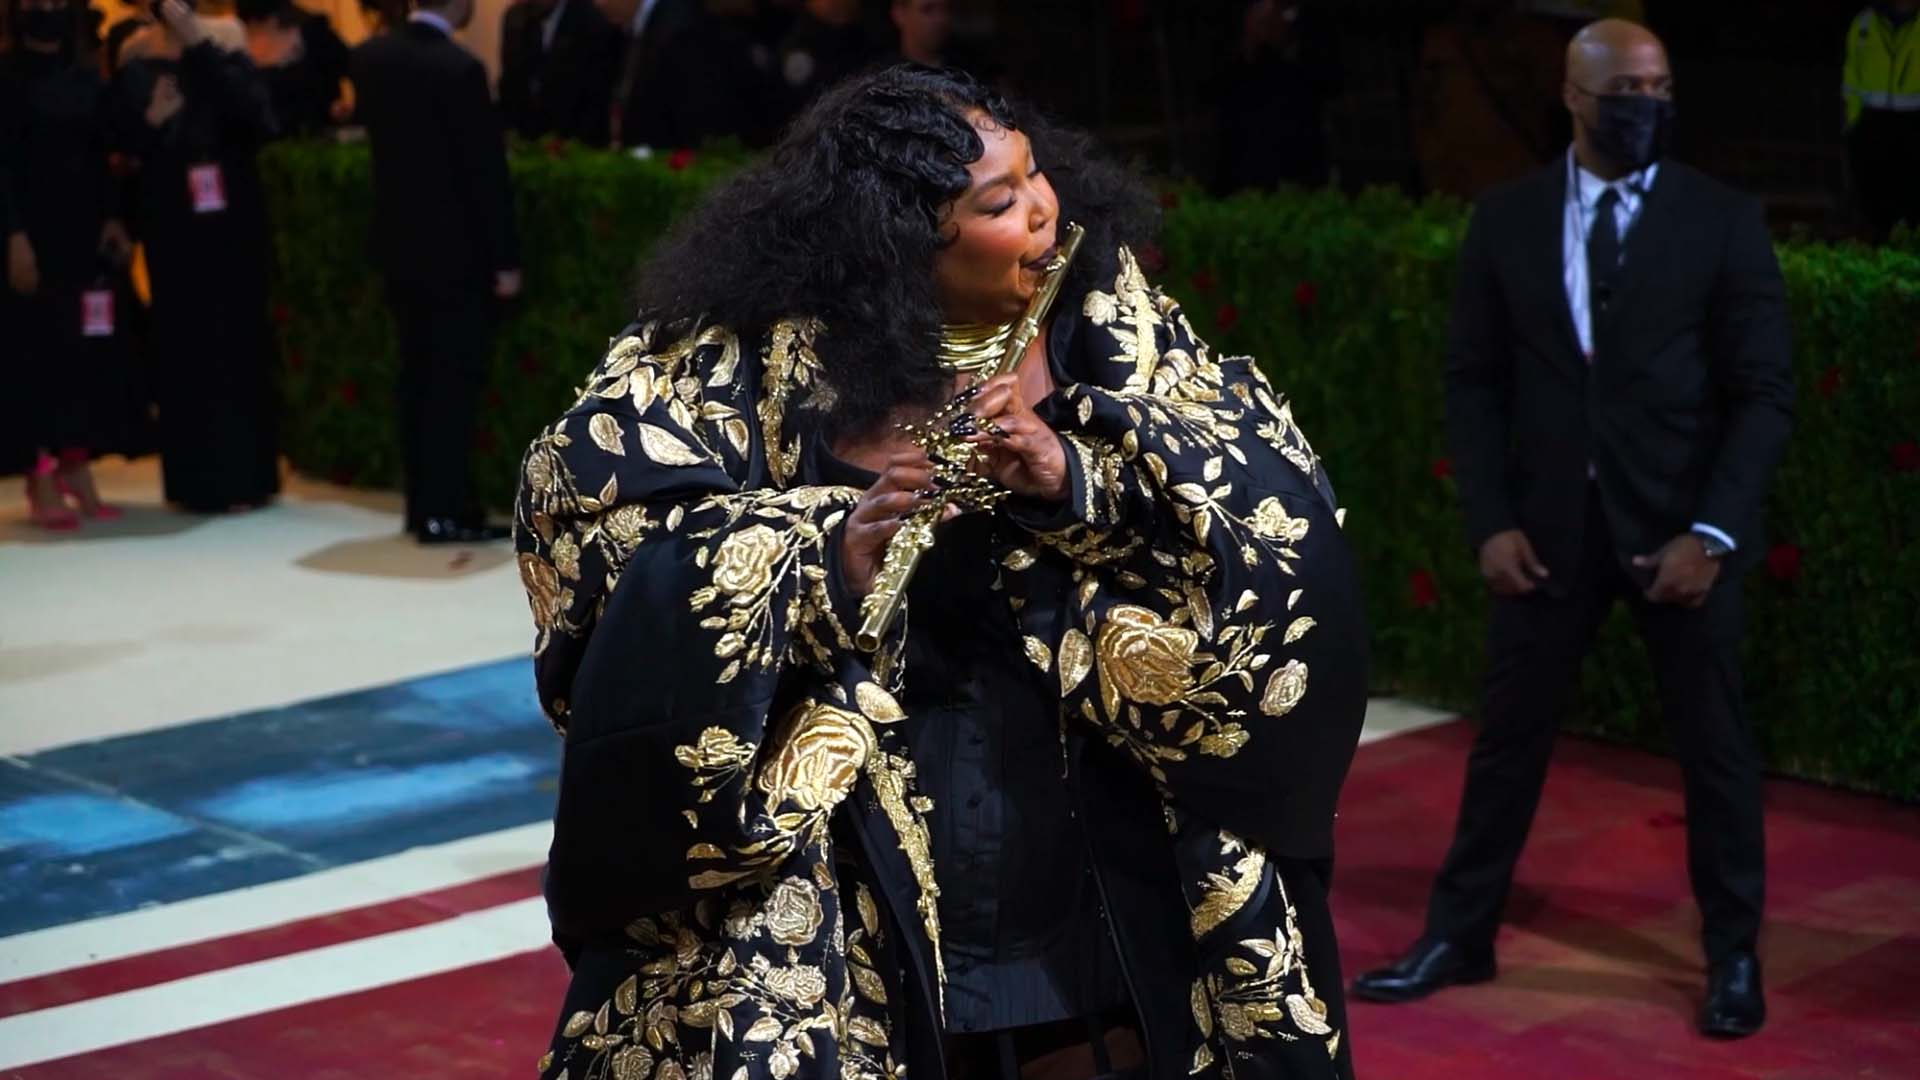 Artist Lizzo plays a flute at the 2022 Met Gala red carpet.